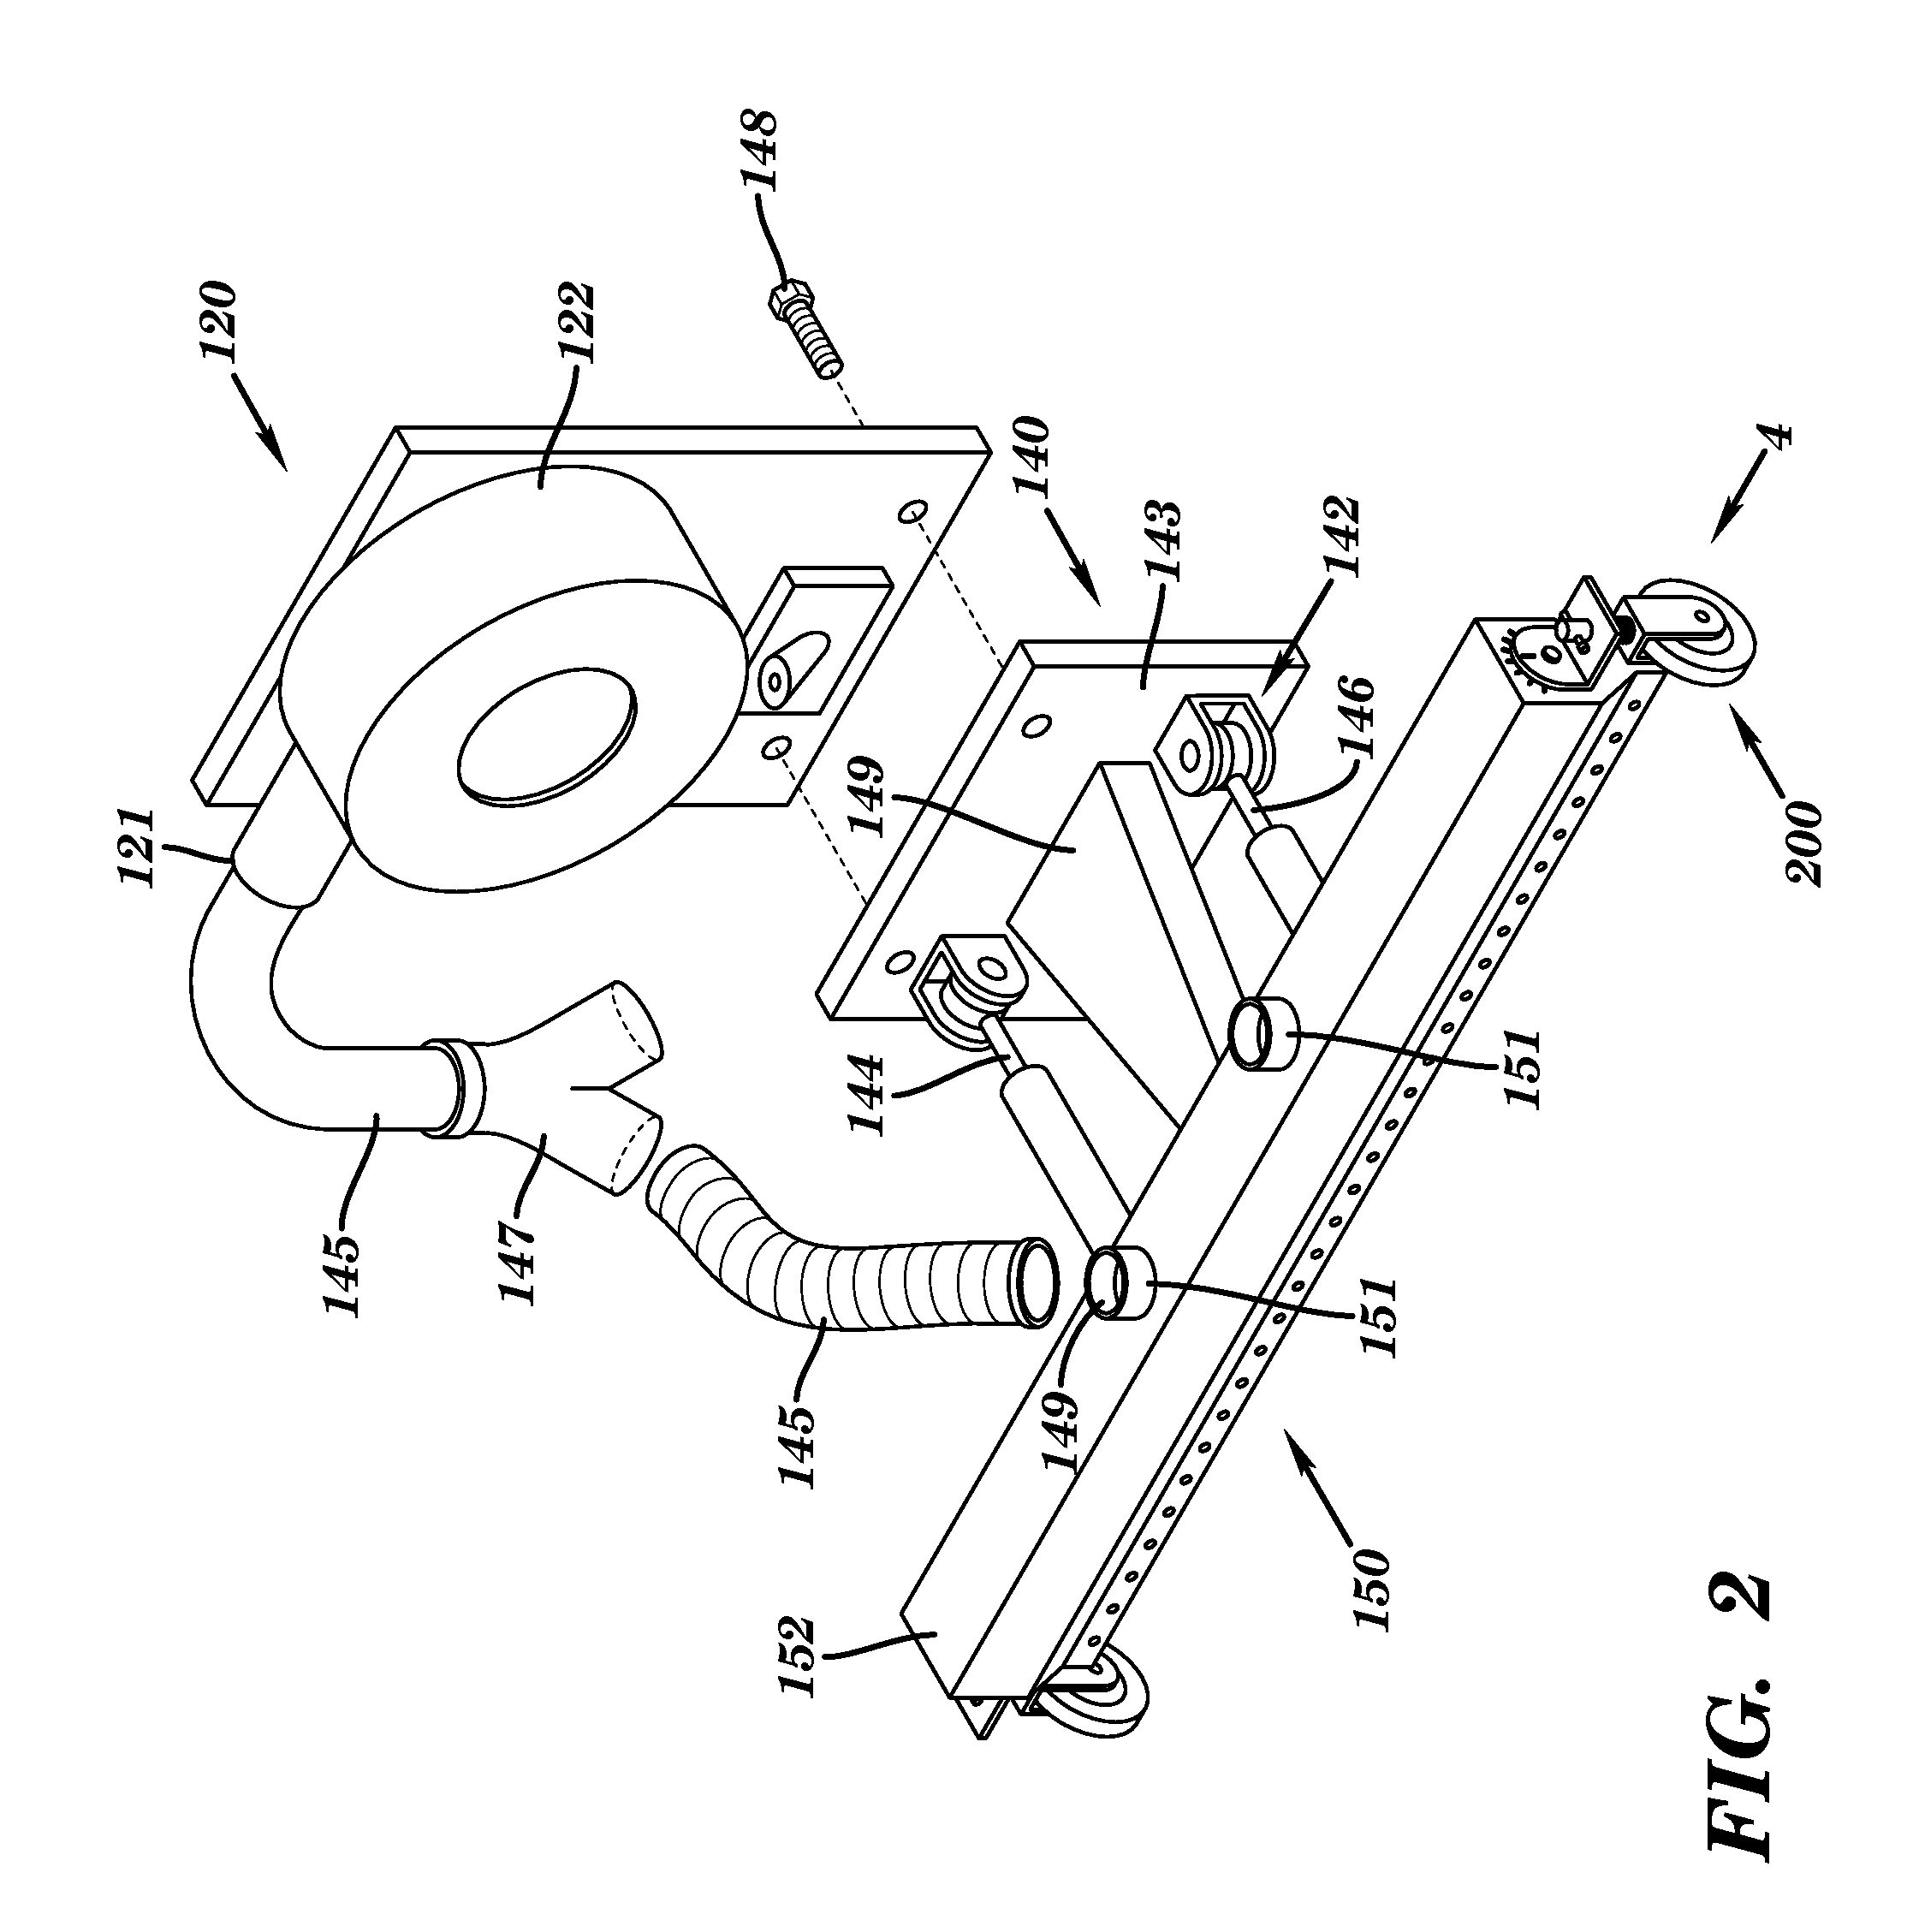 Portable System for Directing Pressurized Air Upon a Surface